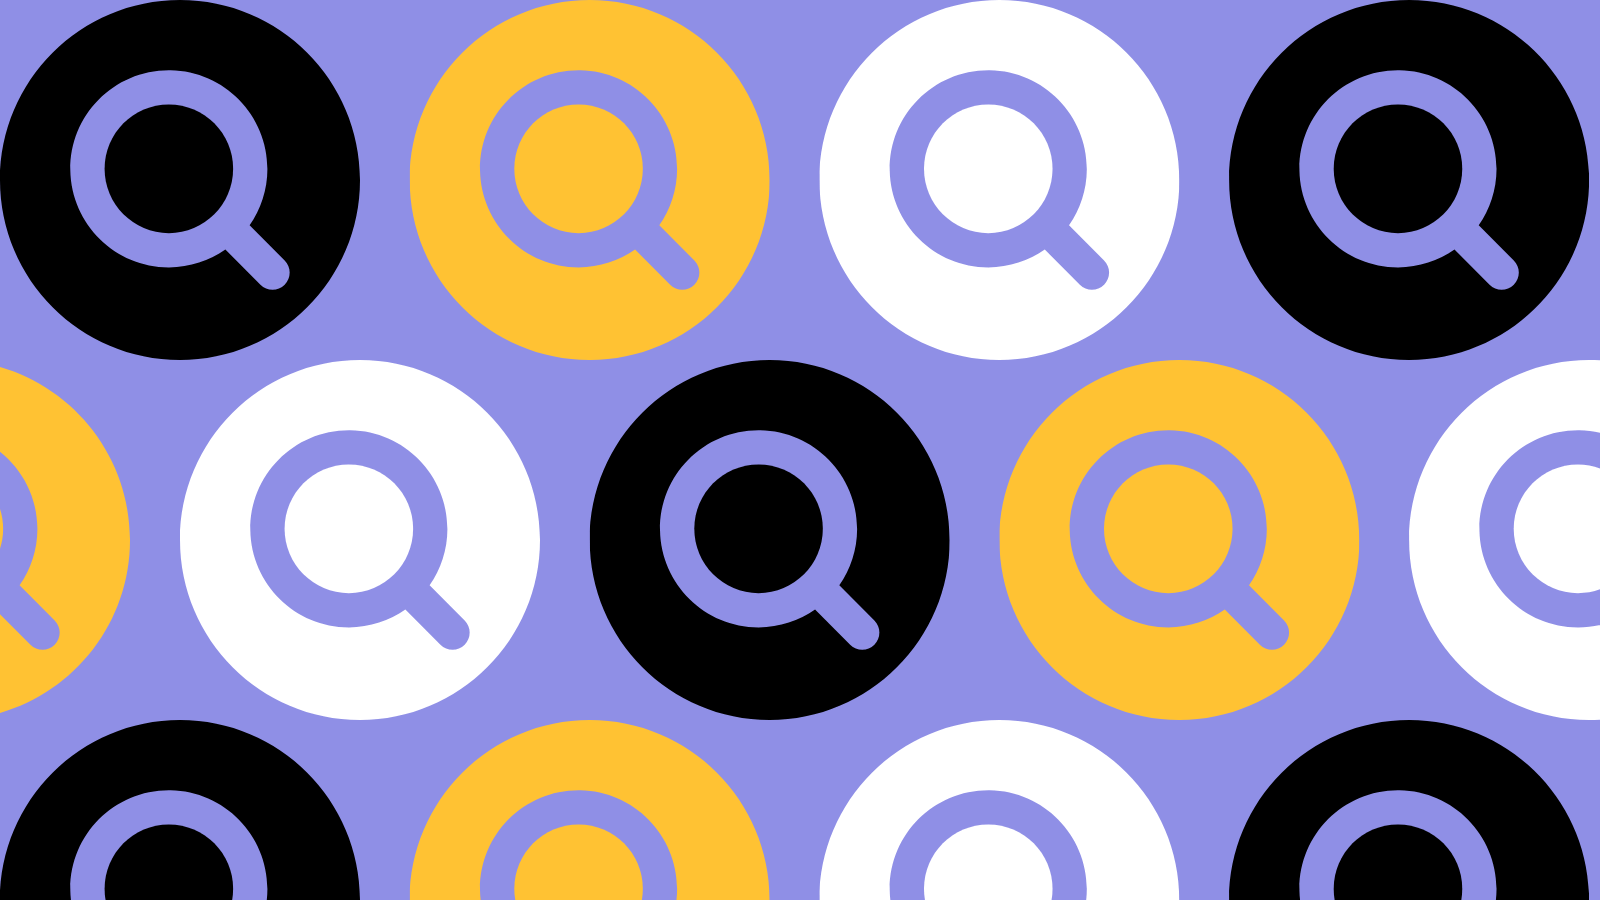 A repeating pattern of magnifying glass icons (1)